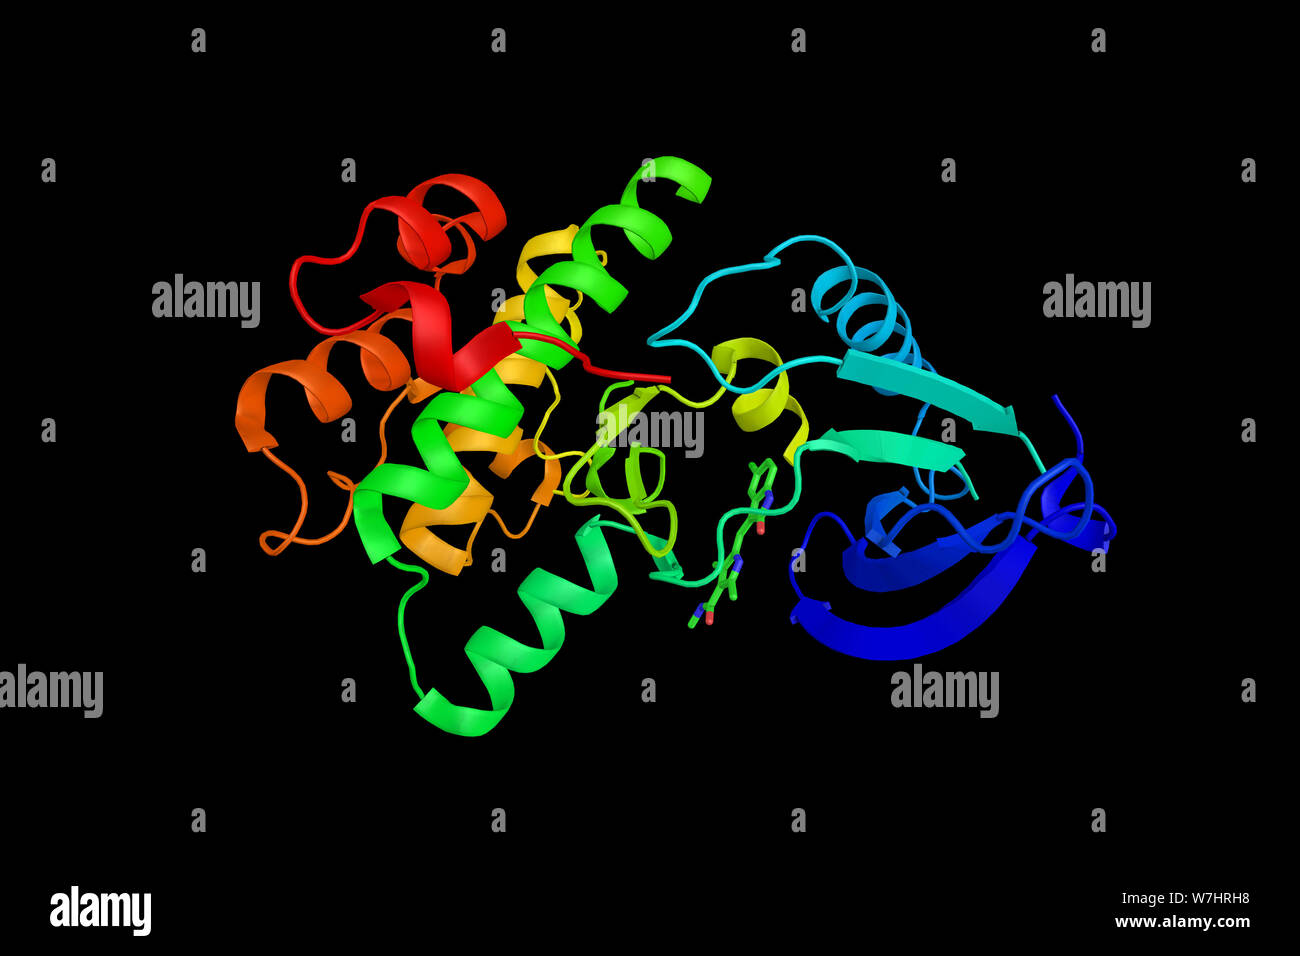 Serine/threonine-protein kinase Nek2, an enzyme shown to interact with MAPK1 and NDC80. 3d rendering. Stock Photo